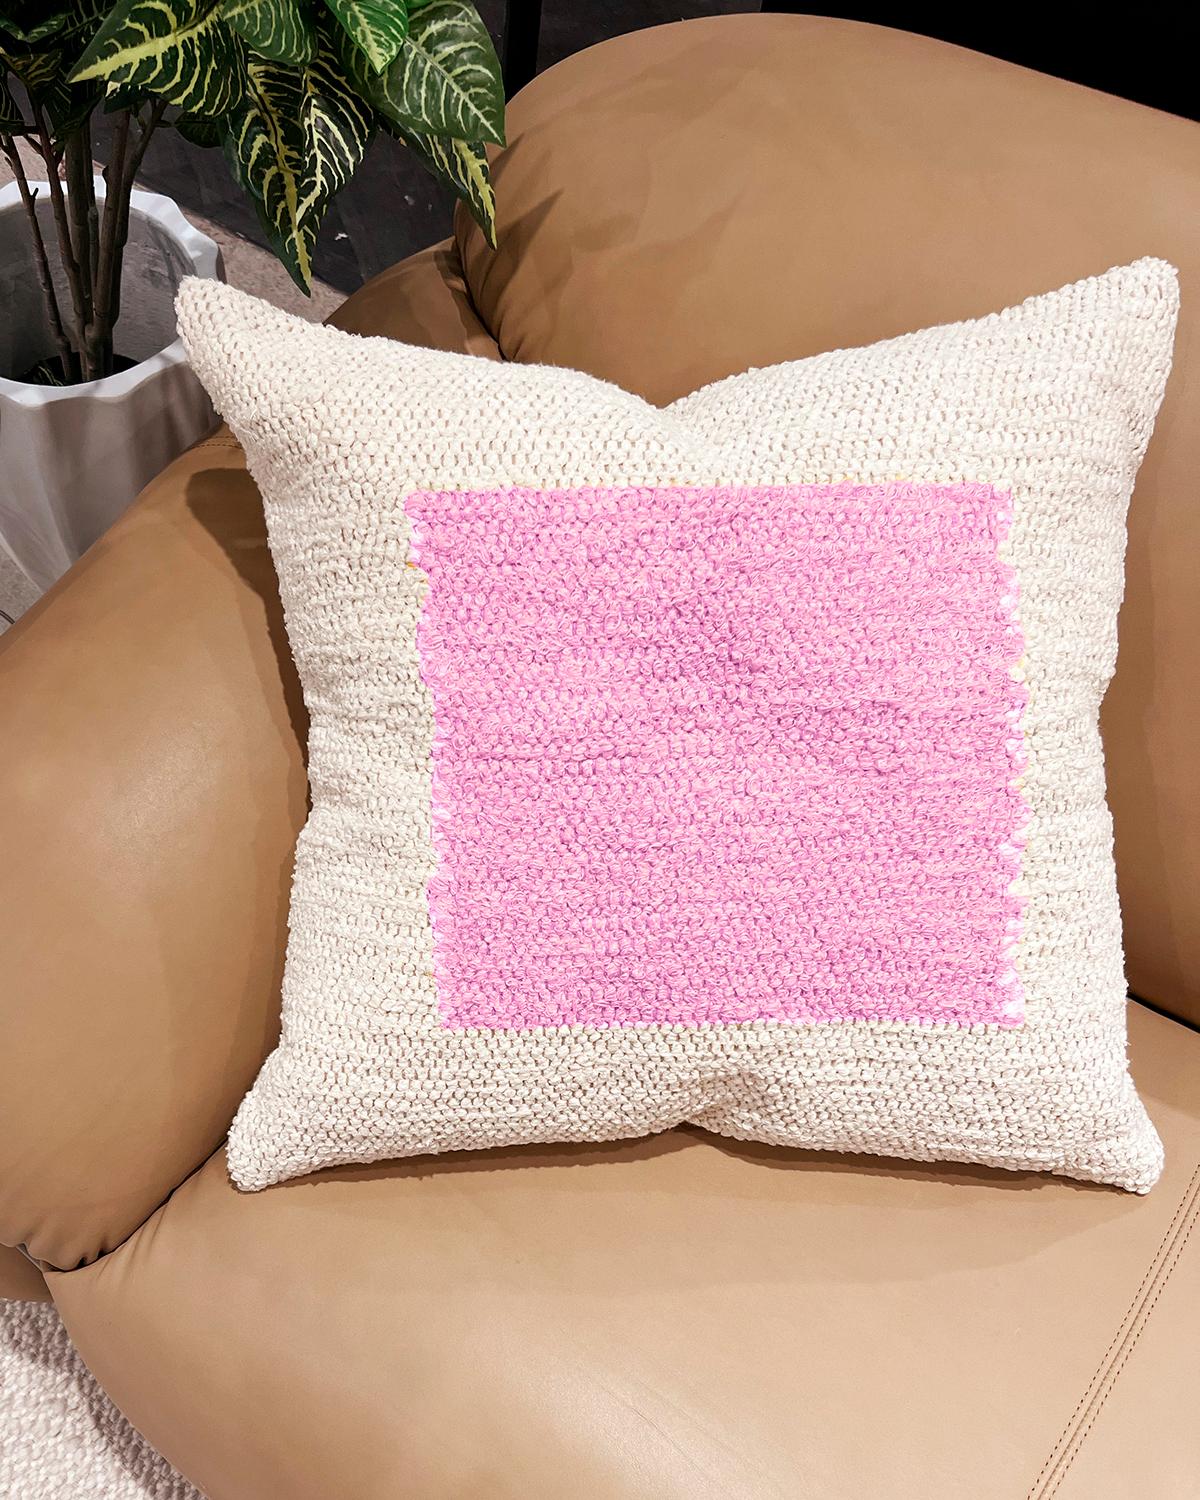 Organic Modern Casa Cubista Handwoven Cotton Pink Square Throw Pillow, in Stock For Sale